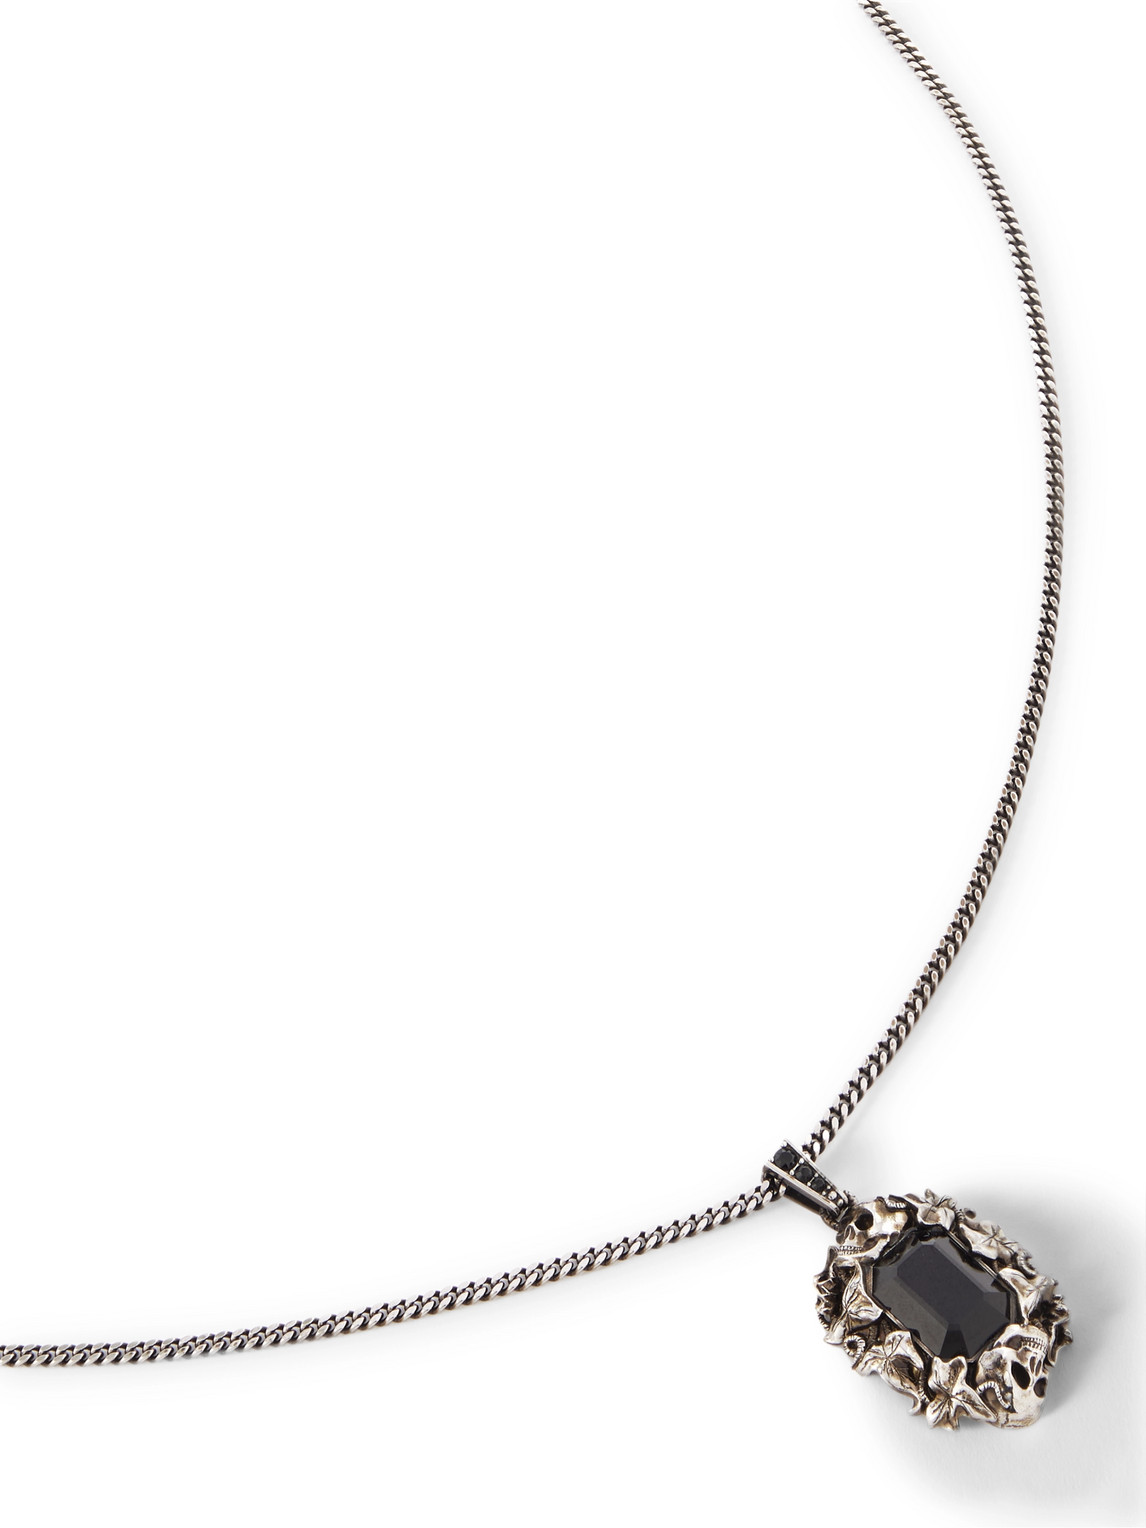 Ivy Skull Silver-Tone Crystal Necklace